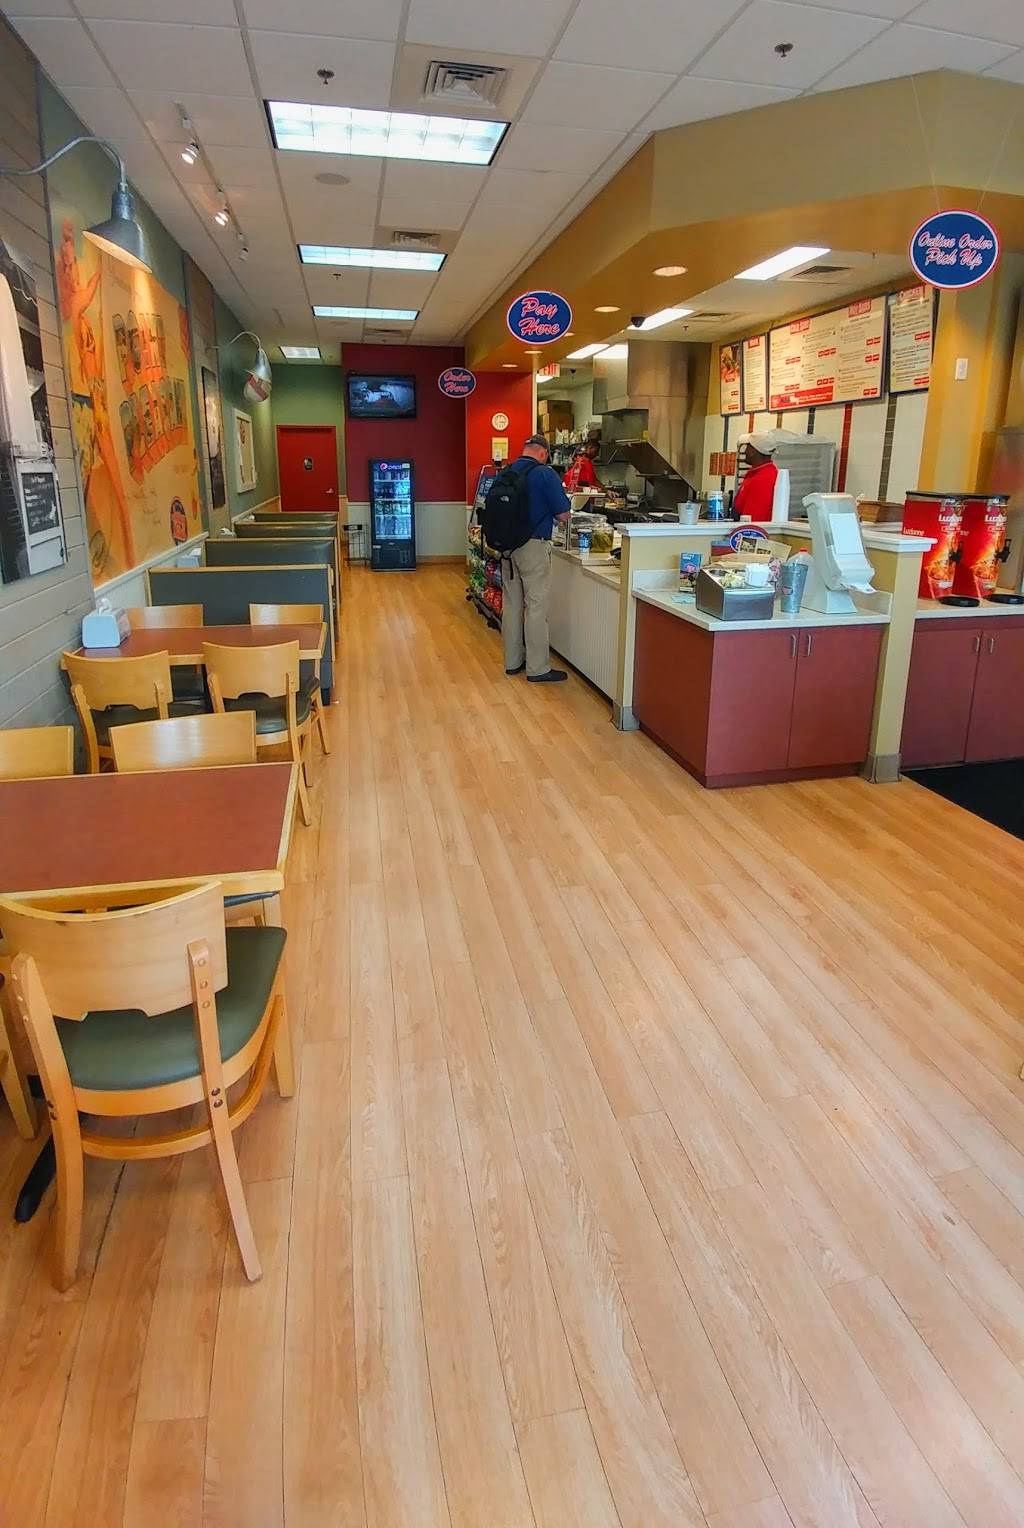 jersey mike's meridian